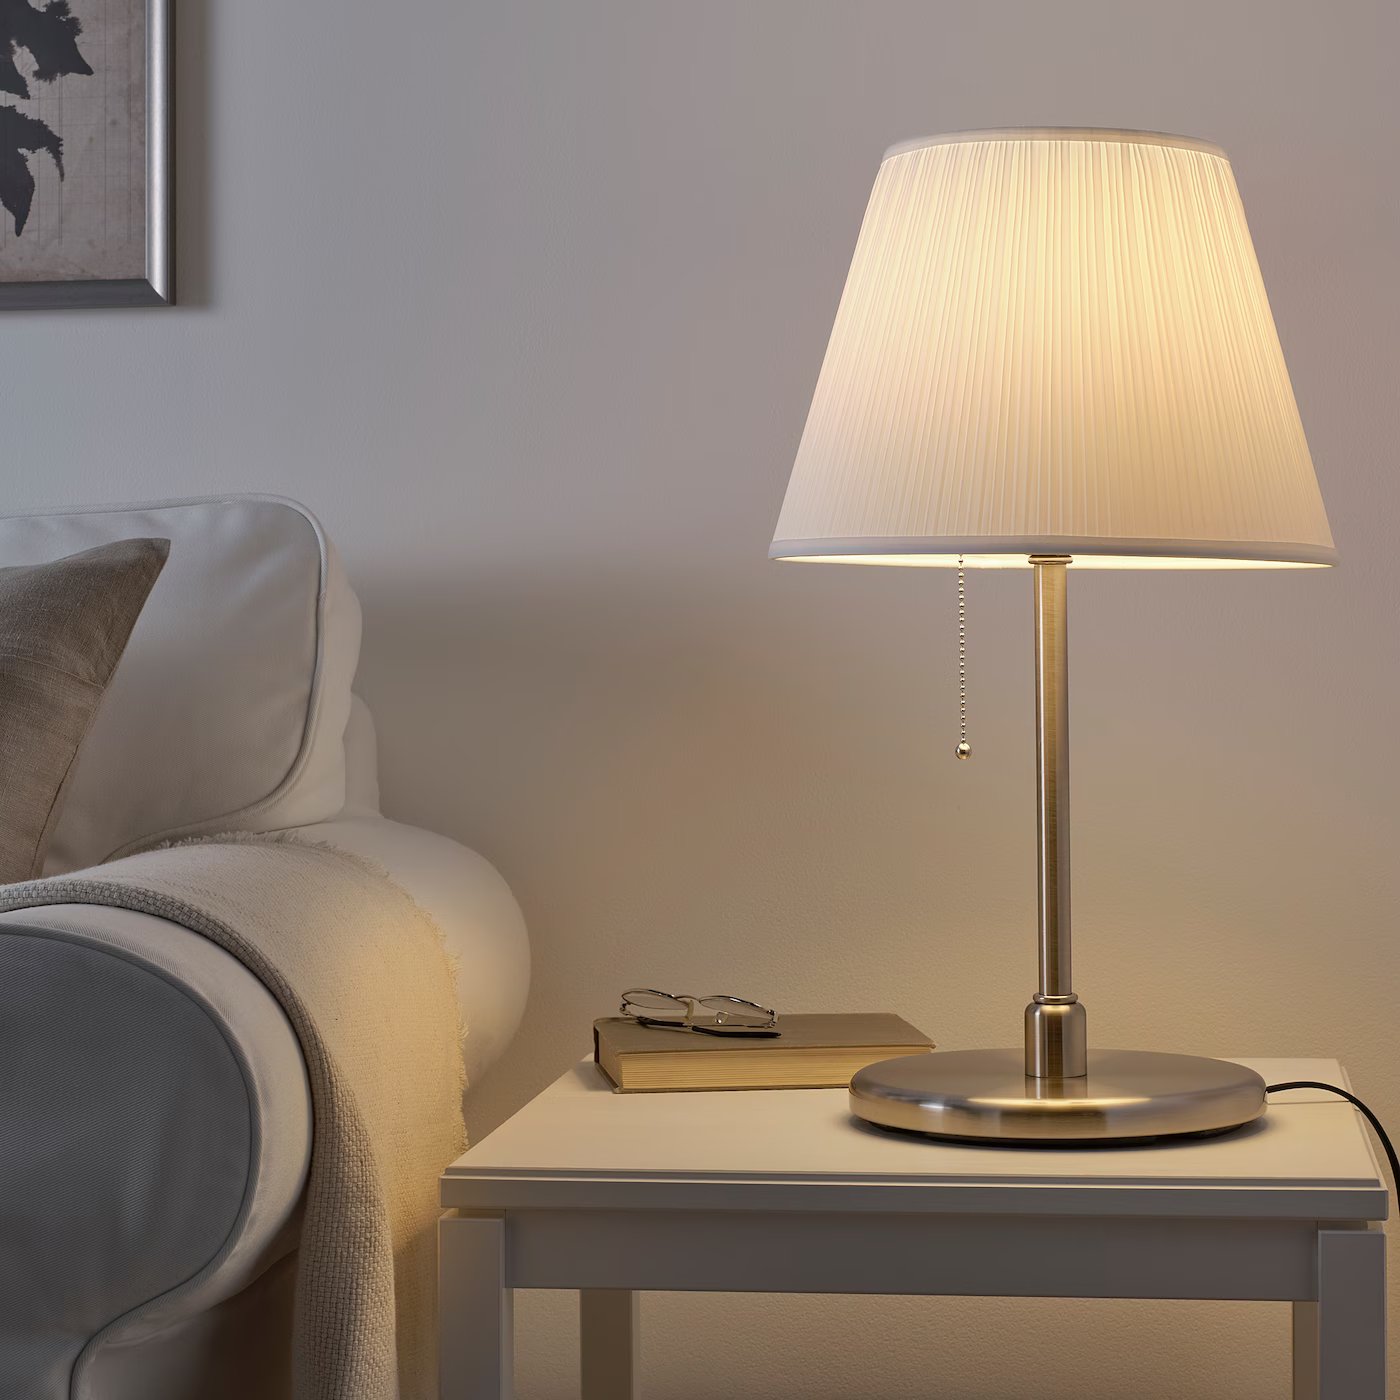 How To Figure Out What Size Of Lamp Shade You Need